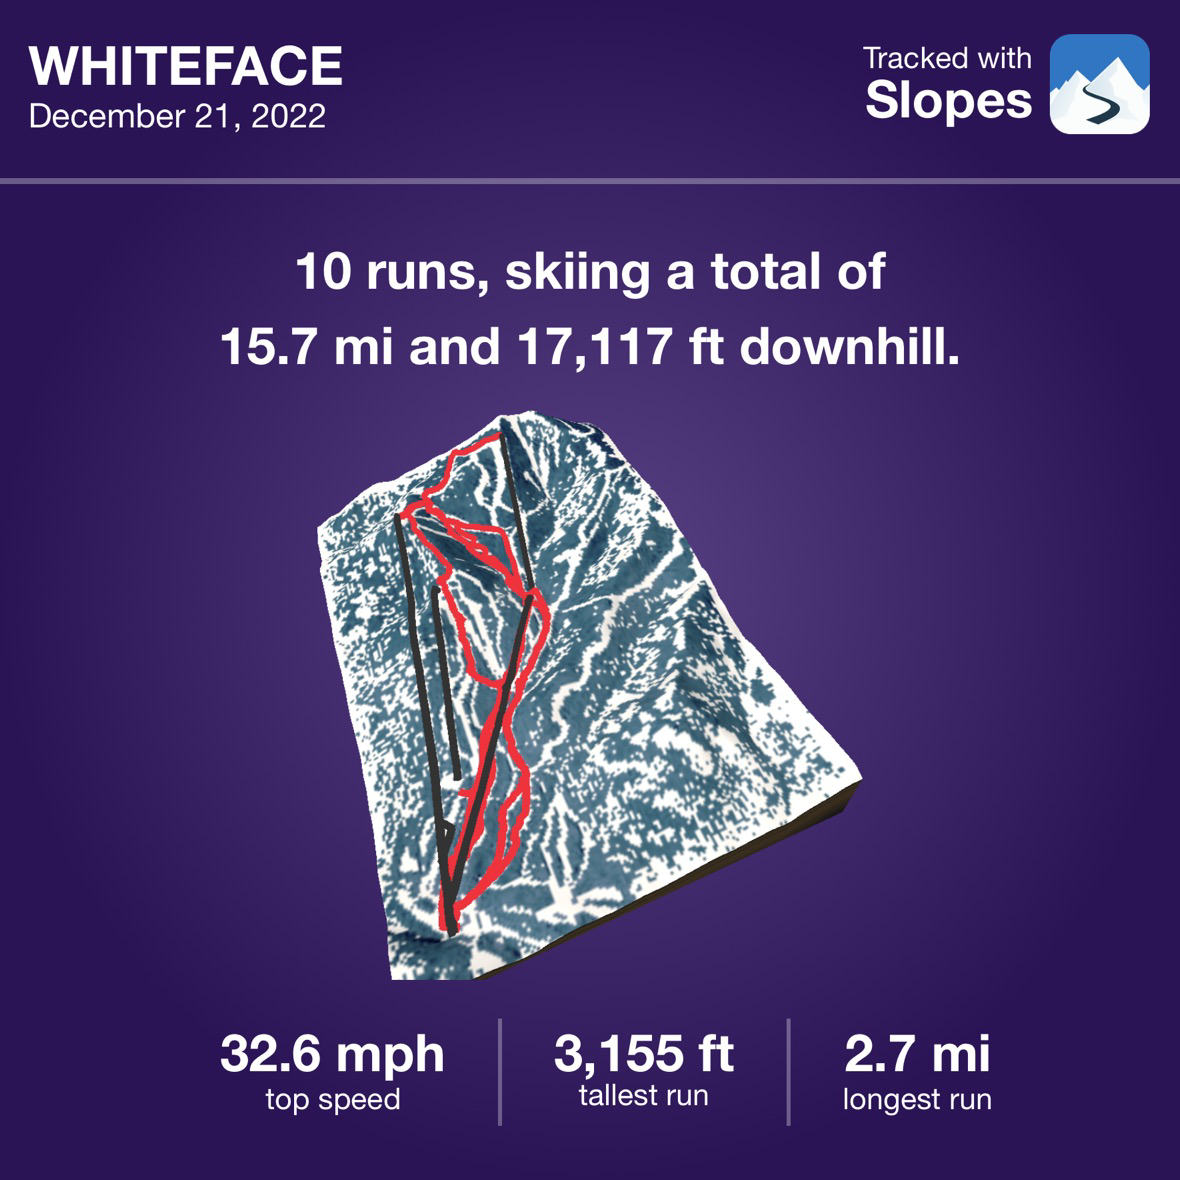 Slopes stats with 10 runs and 17,000 ft of downhill.